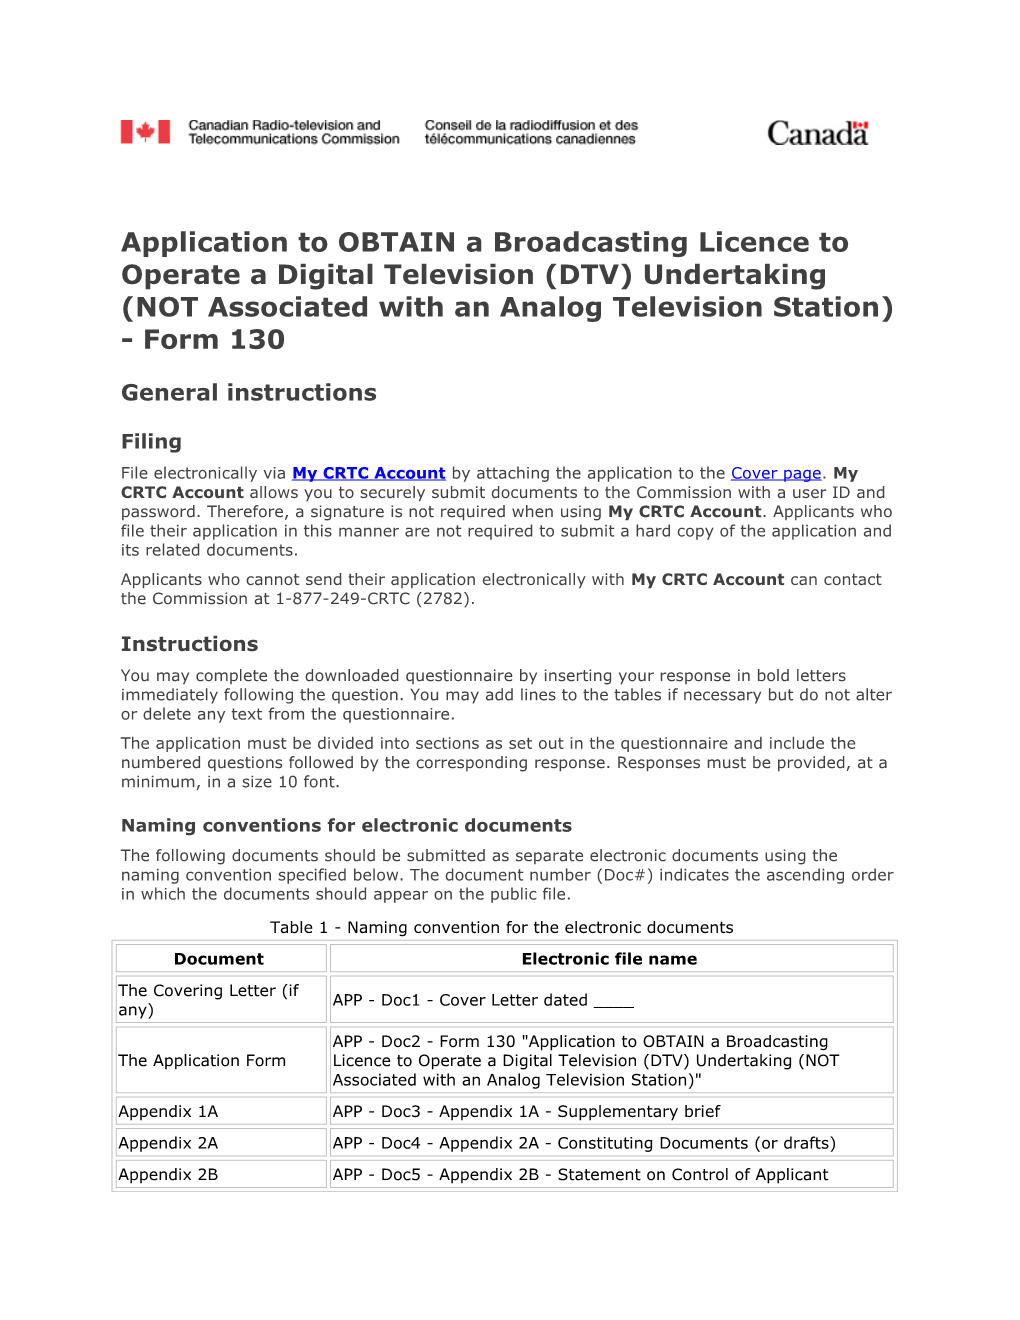 Application to OBTAIN a Broadcasting Licence to Operate a Digital Television (DTV) Undertaking